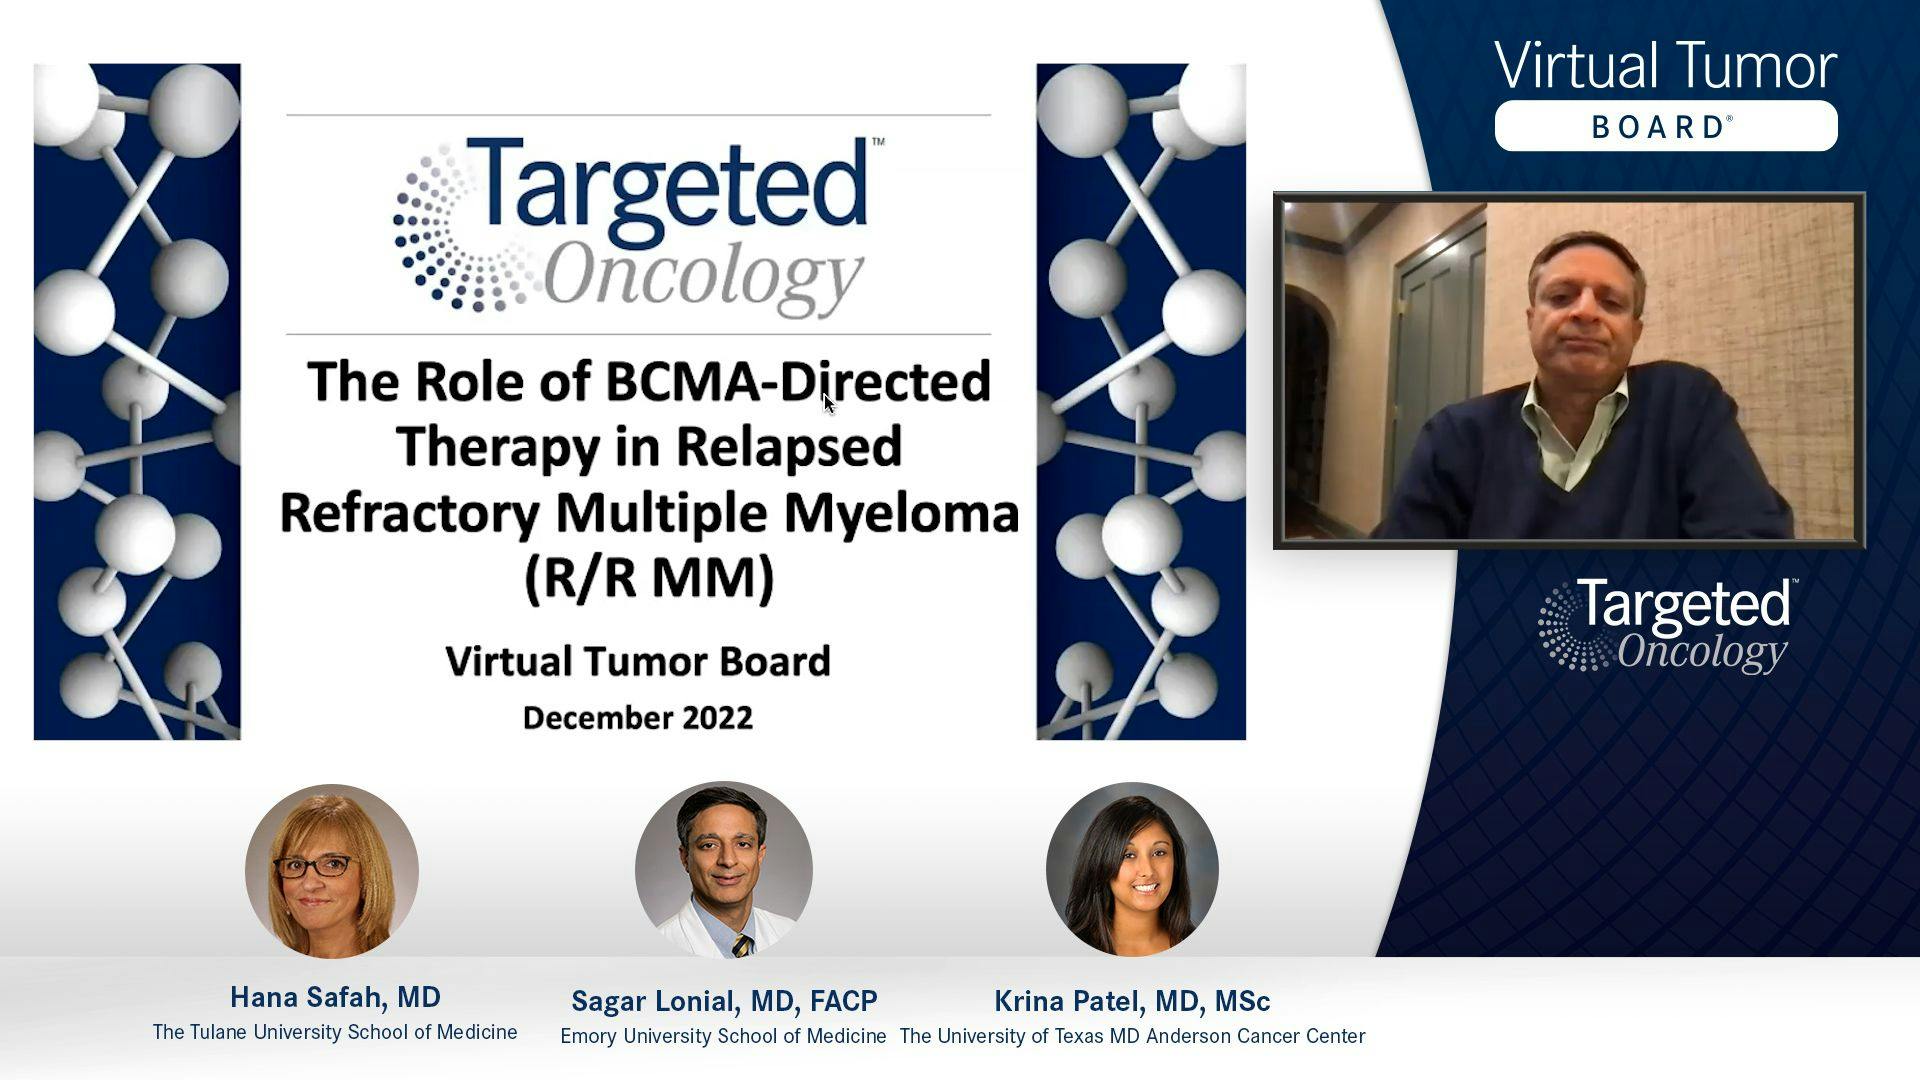 Case 1: Treatment of R/R MM with a BCMA-Directed Bispecific Antibody